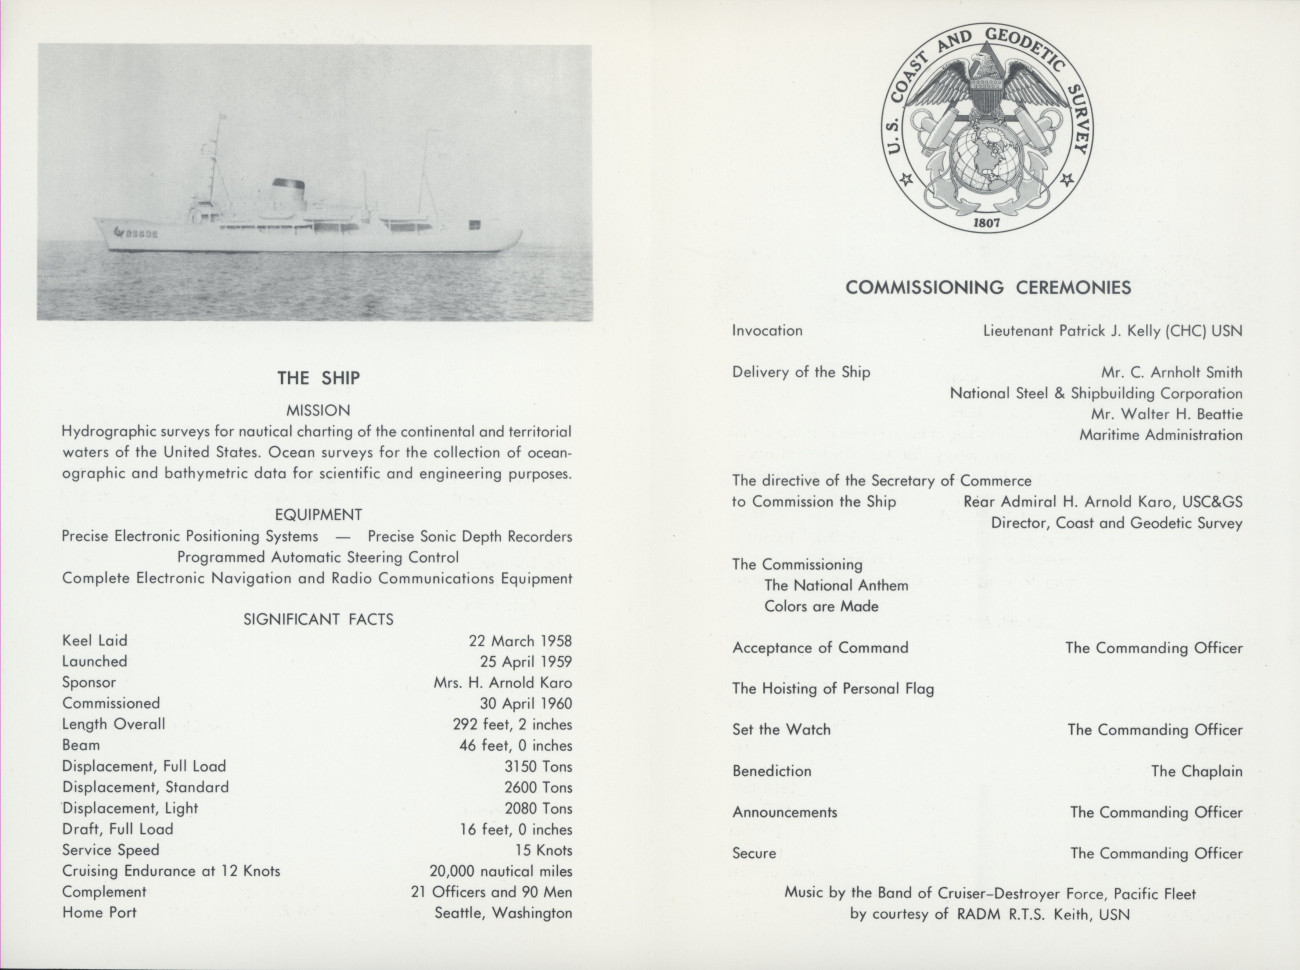 Invitation to the launching of the Coast and Geodetic Survey ShipSURVEYOR on April 25, 1959